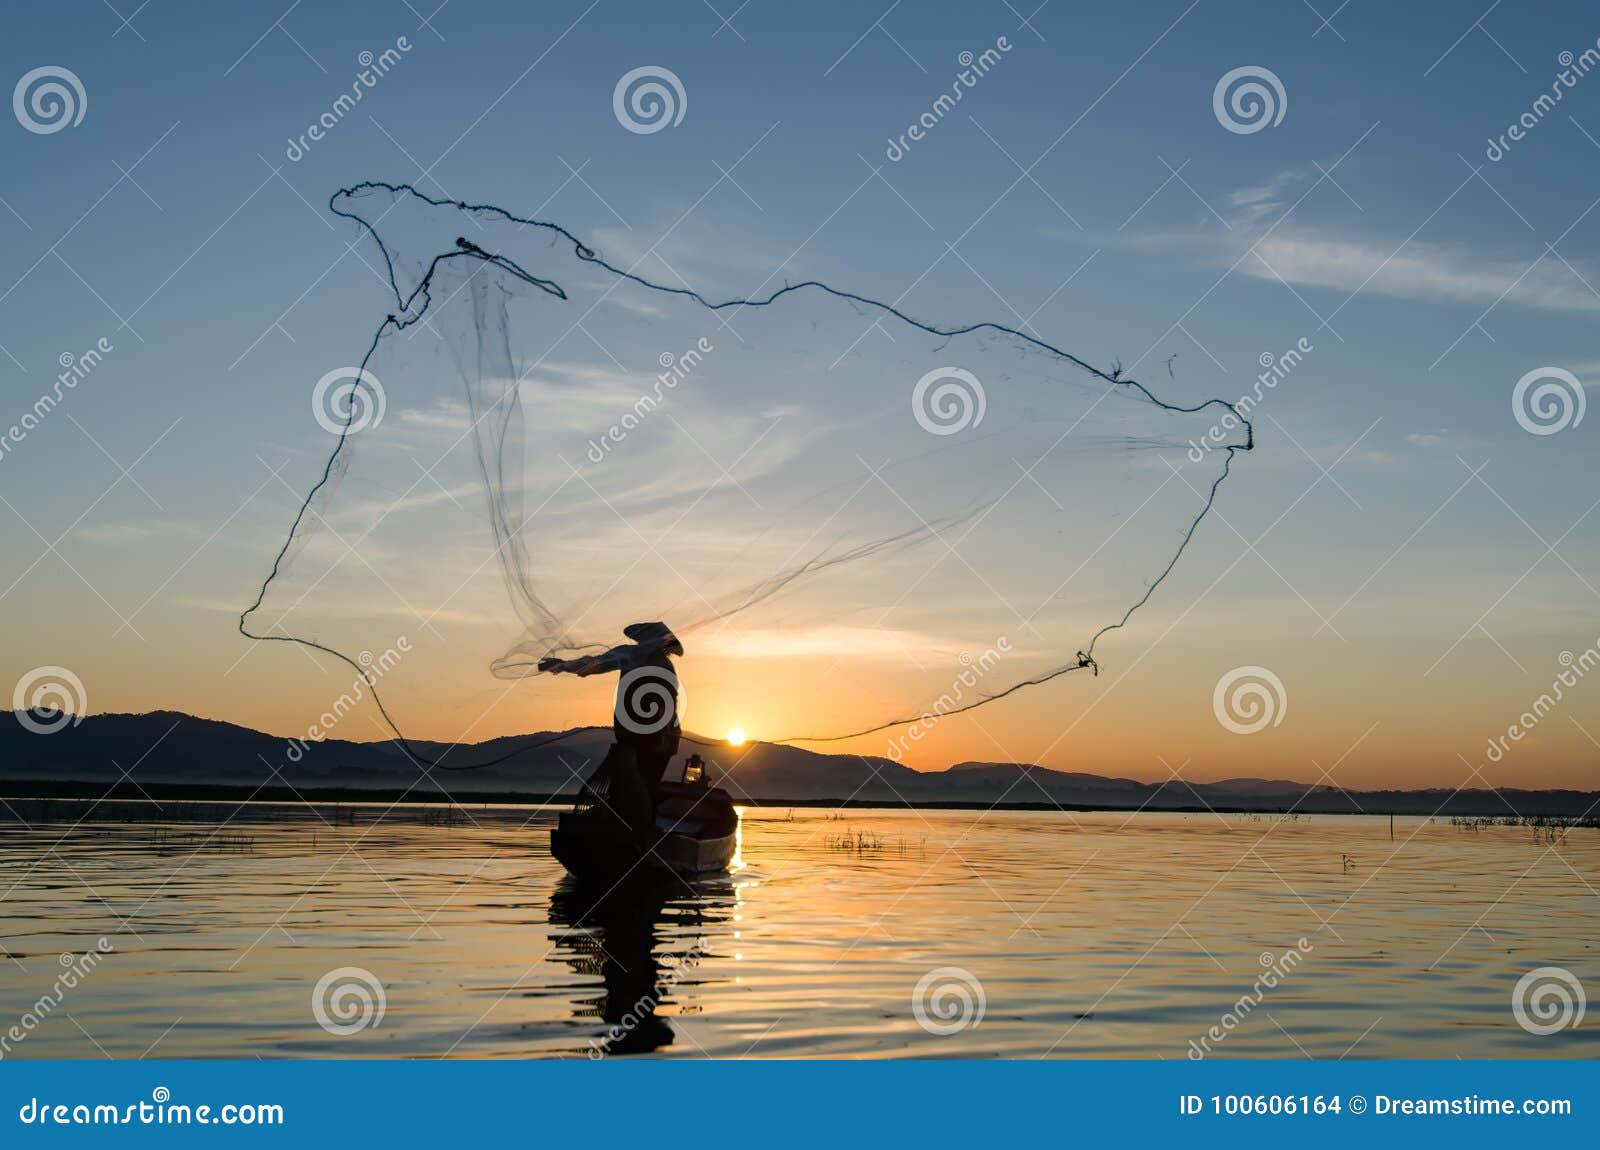 https://thumbs.dreamstime.com/z/asian-fisherman-asian-fisherman-wooden-boat-casting-net-catching-freshwater-fish-nature-river-early-morning-100606164.jpg